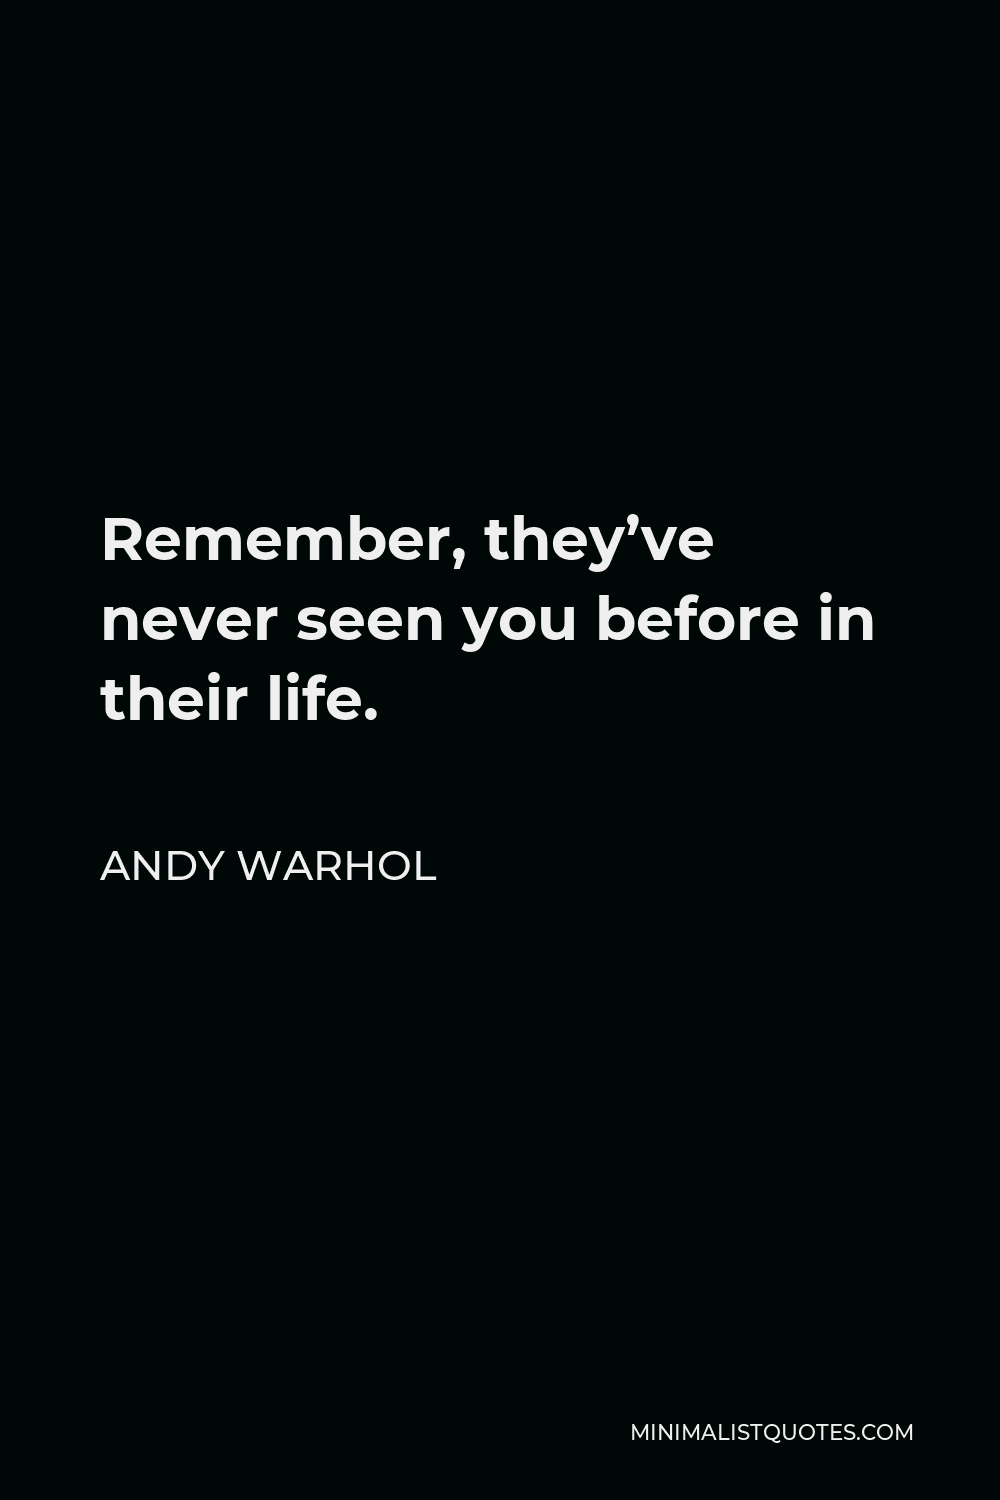 Andy Warhol Quote - Remember, they’ve never seen you before in their life.